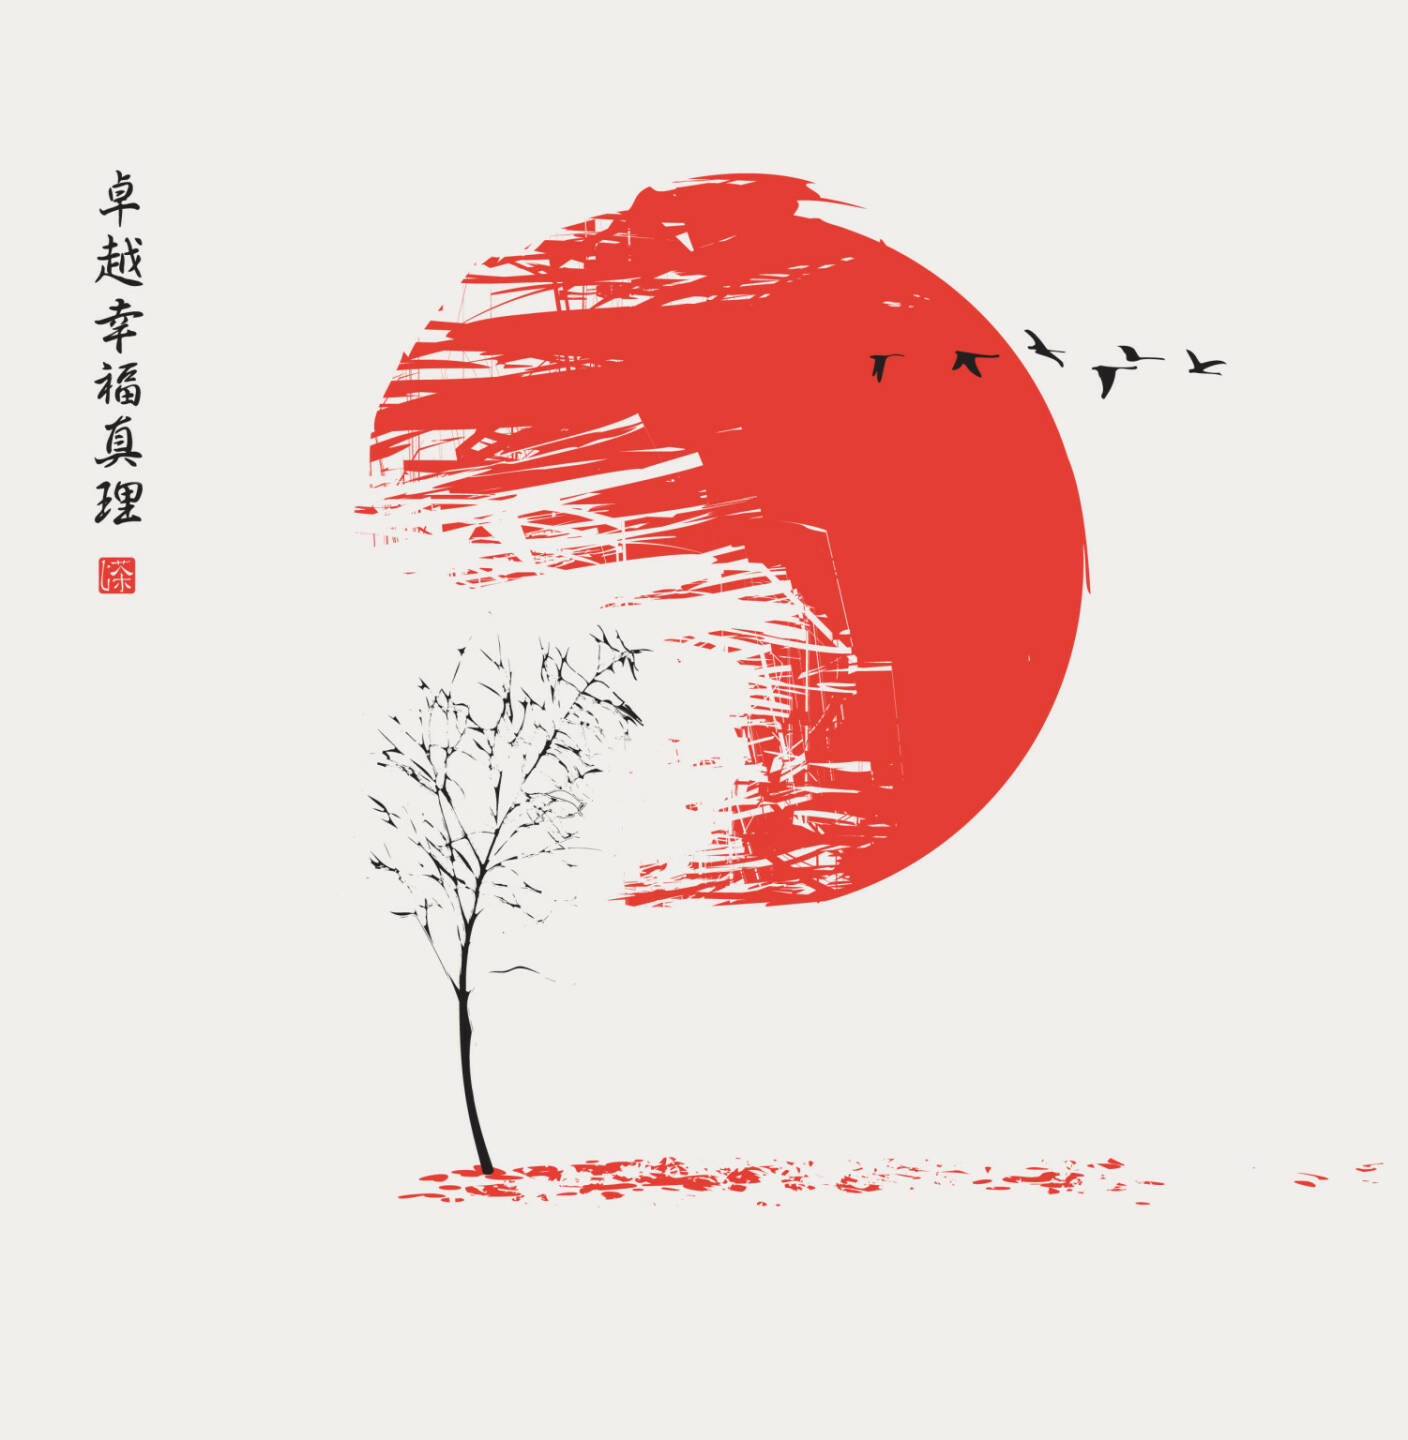 Japan, Perfection, Happiness, Truth - http://www.shutterstock.com/de/pic-176484302/stock-vector-autumn-landscape-with-tree-at-sunset-and-a-flock-of-birds-the-chinese-characters-perfection.html (Bild: shutterstock.com)